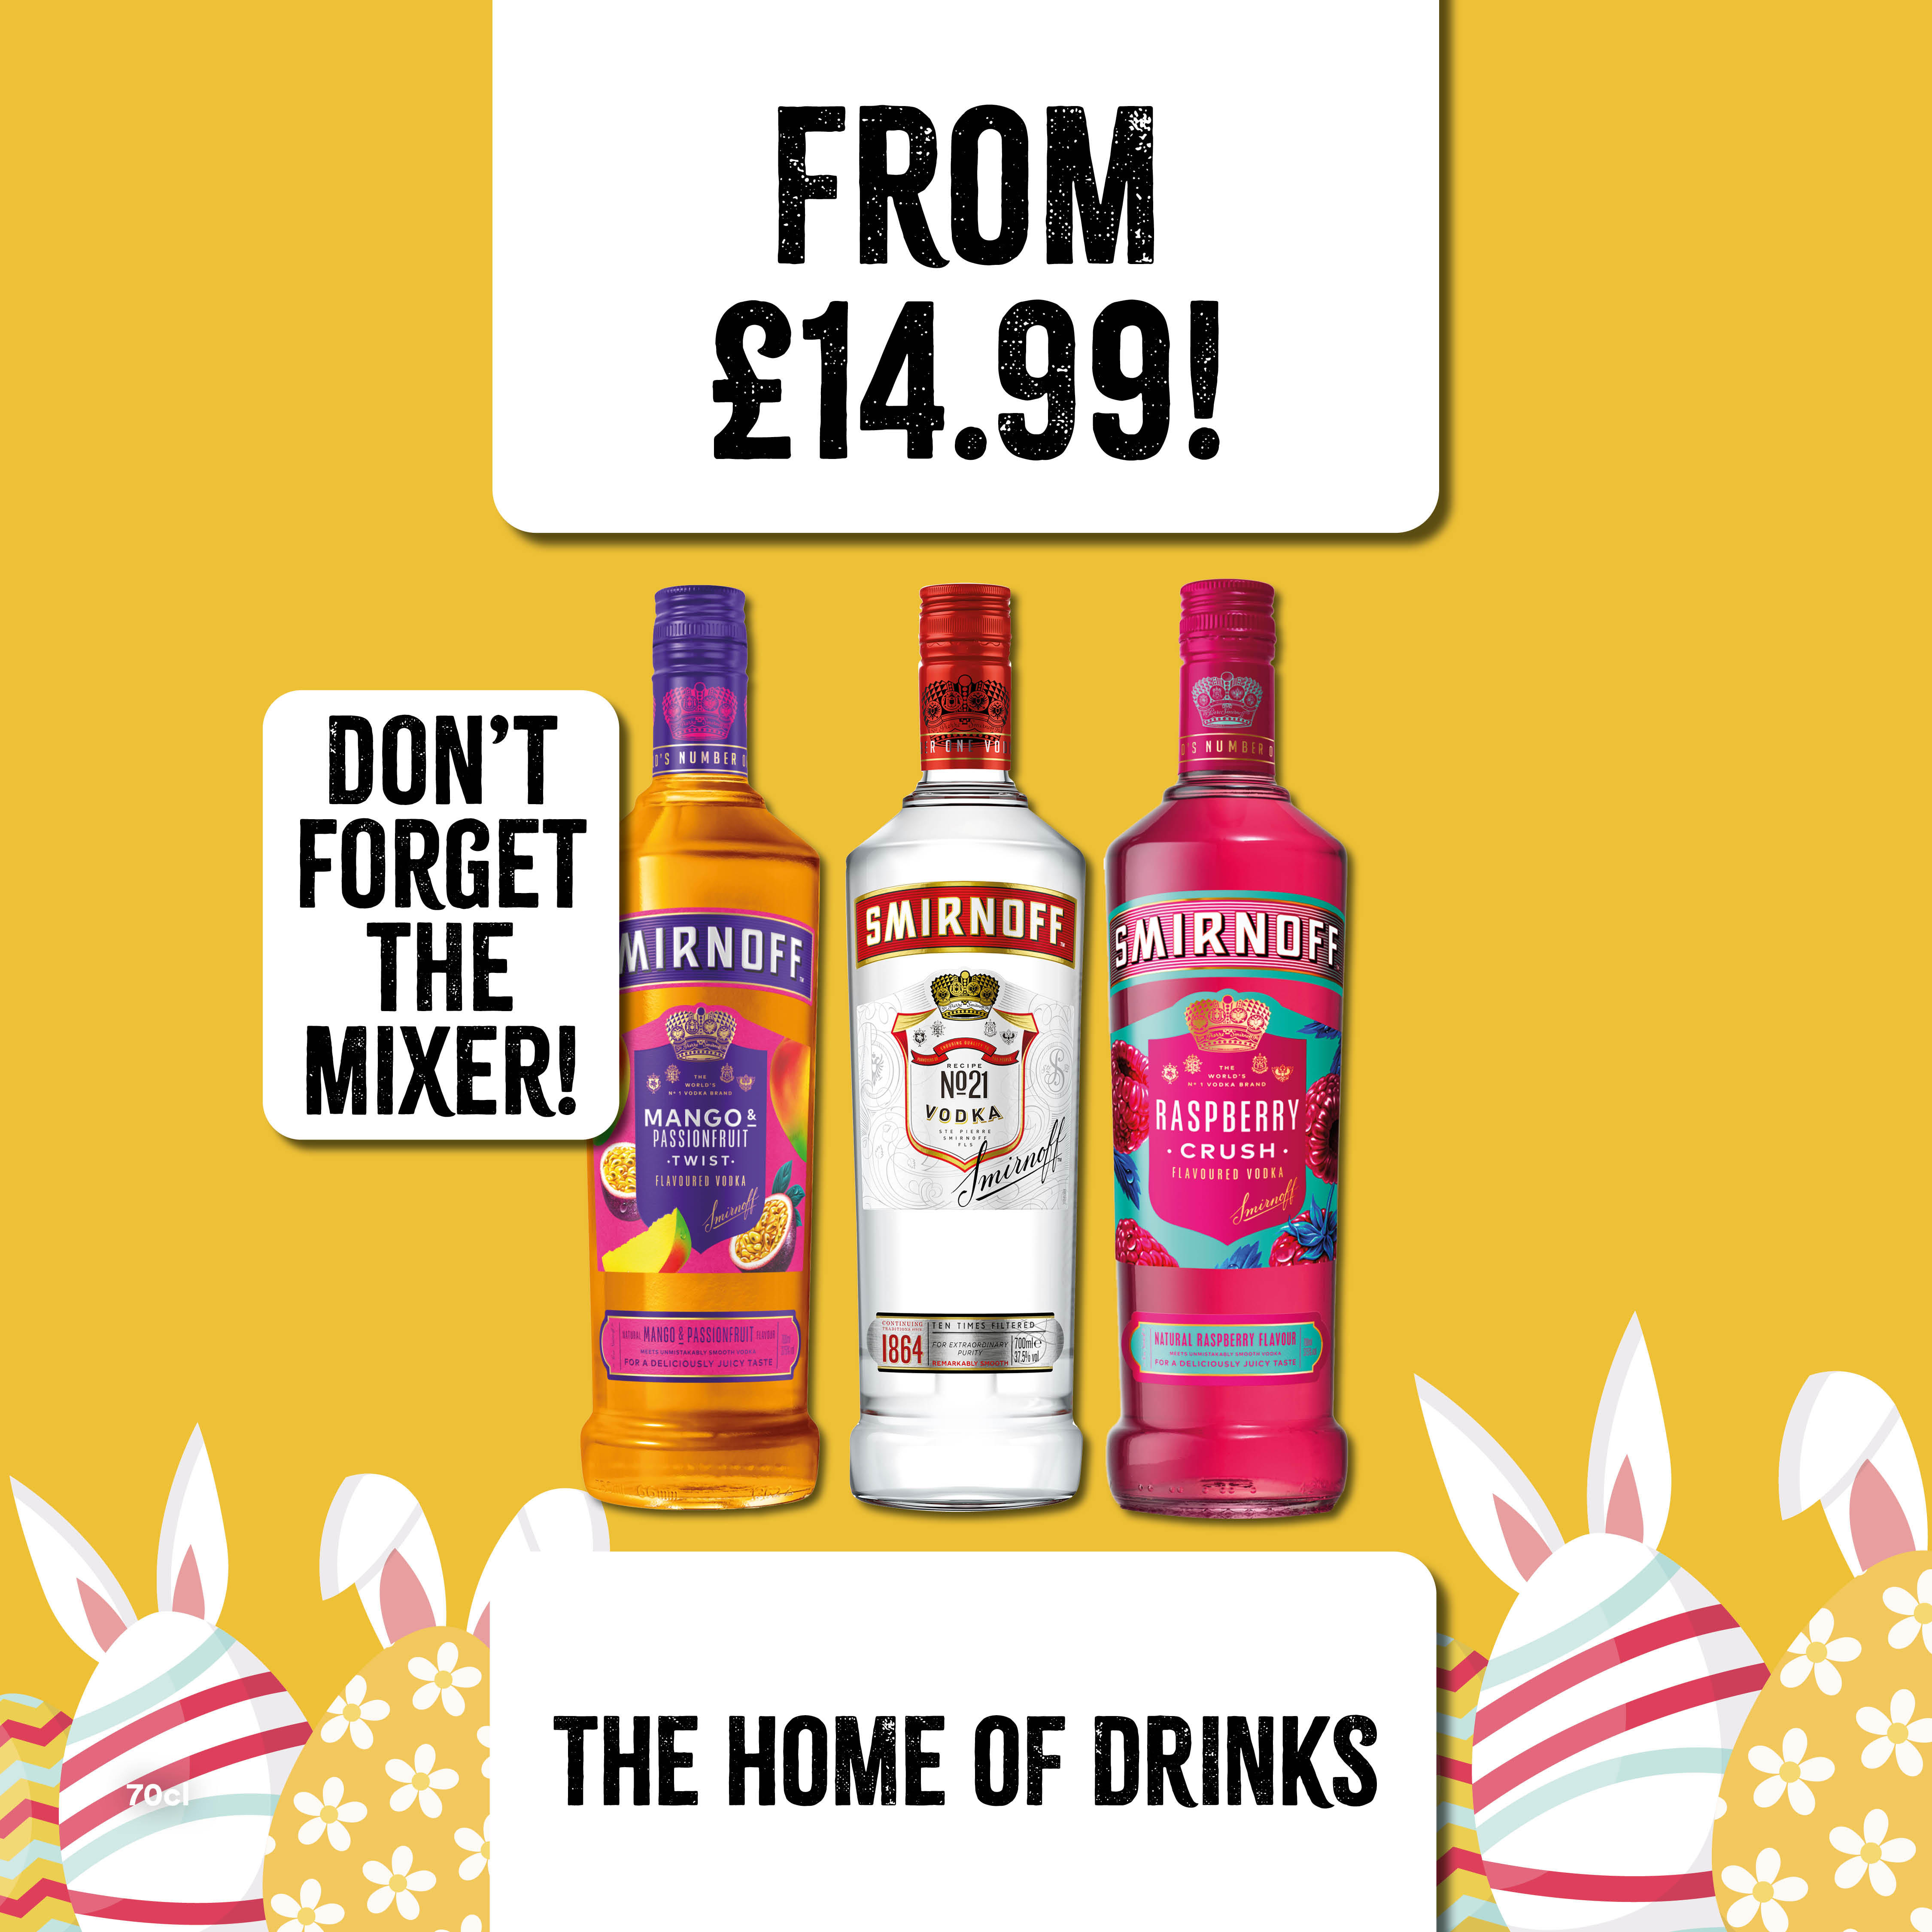 Smirnoff flavours - From £14.99 Bargain Booze Select Convenience Carlisle 01228 590714